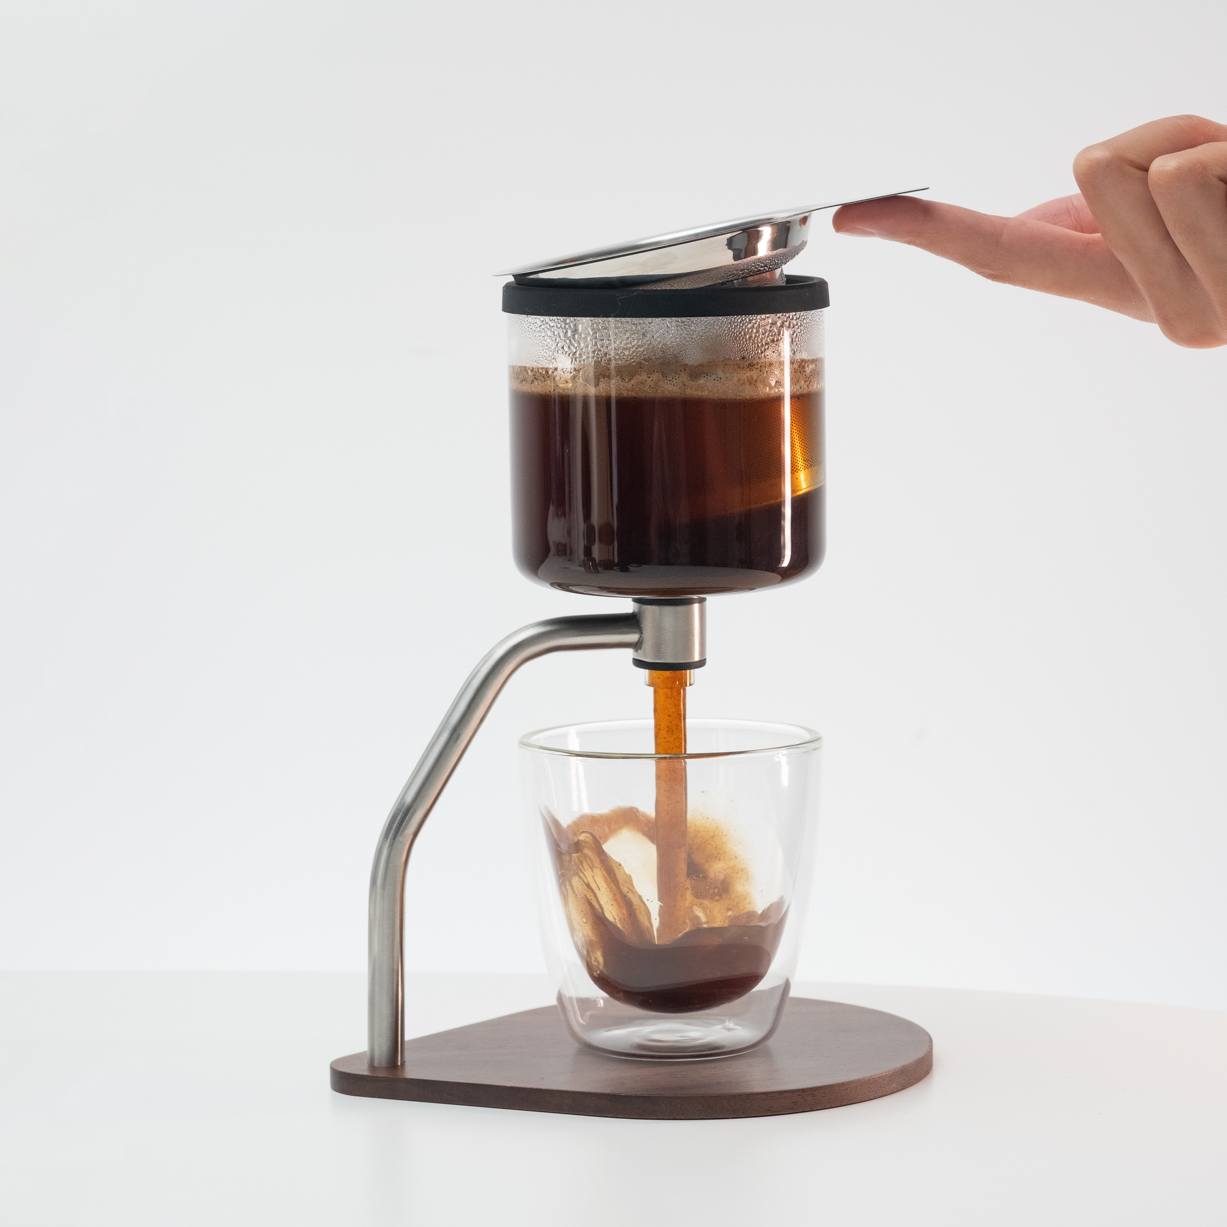 Manual Brewer by Joy Resolve - Premium Homewares from Joy Resolve - Just Dhs. 349! Shop now at Liwa Coffee Roastery